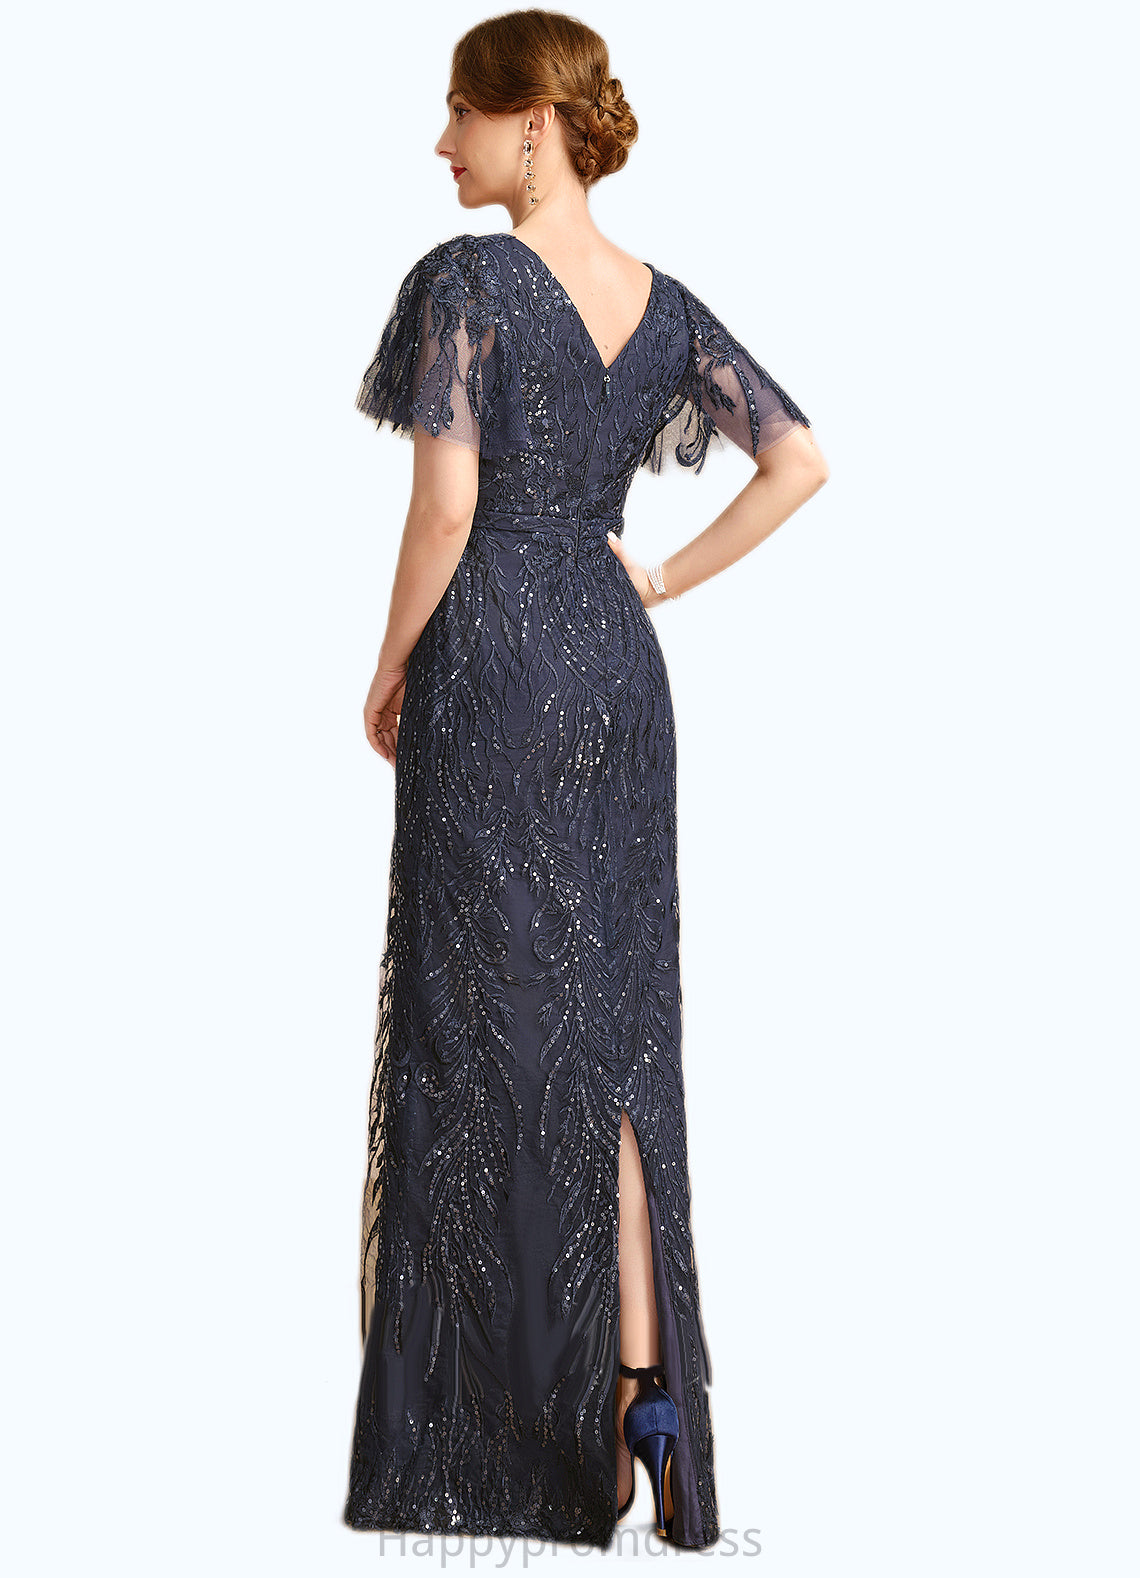 Julia Sheath/Column Square Floor-Length Lace Mother of the Bride Dress With Sequins XXSP0021665